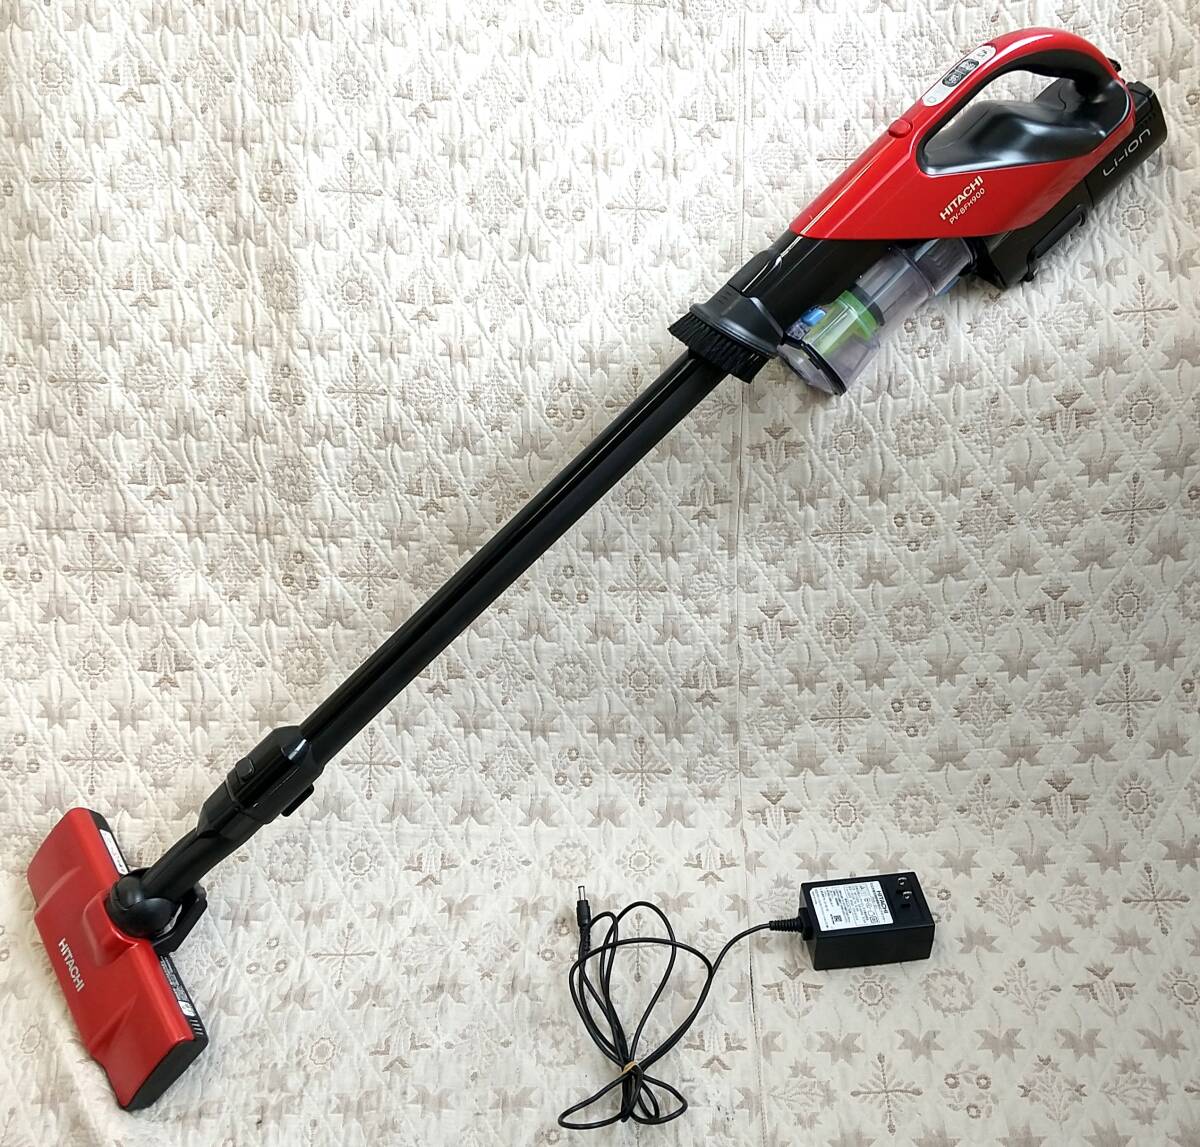 [416] secondhand goods Hitachi cordless cleaner PV-BFH900(R)2019 year made 